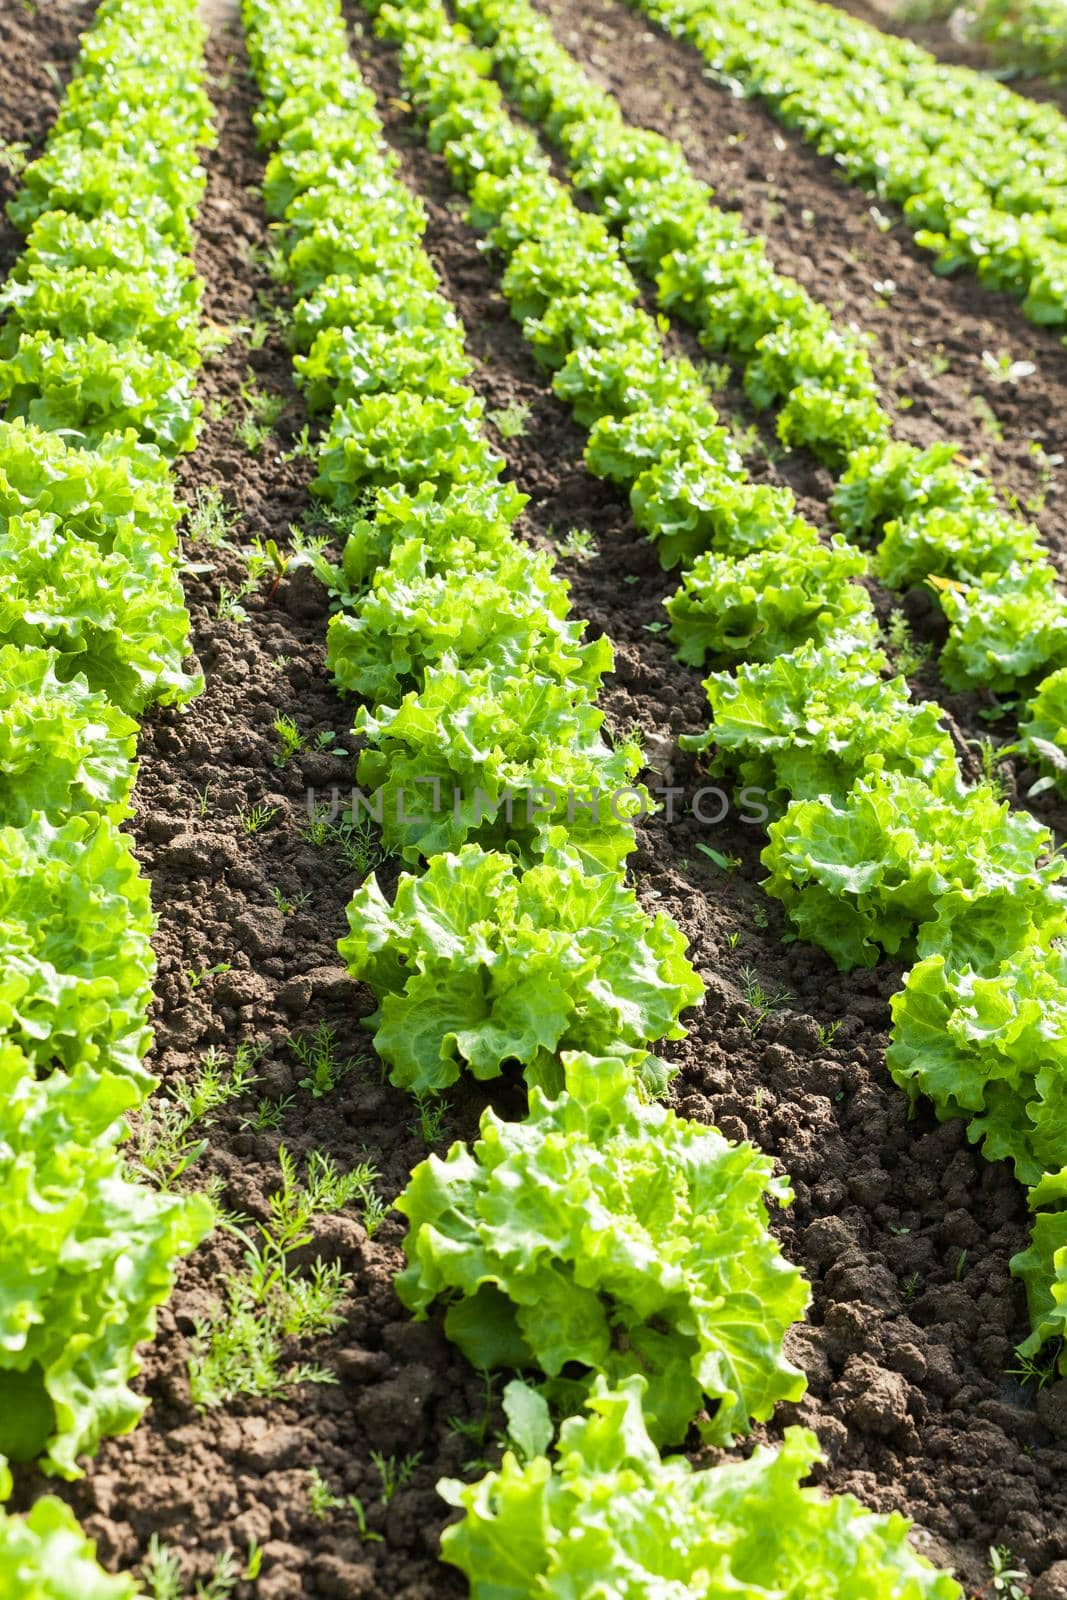 culture of organic salad in greenhouses